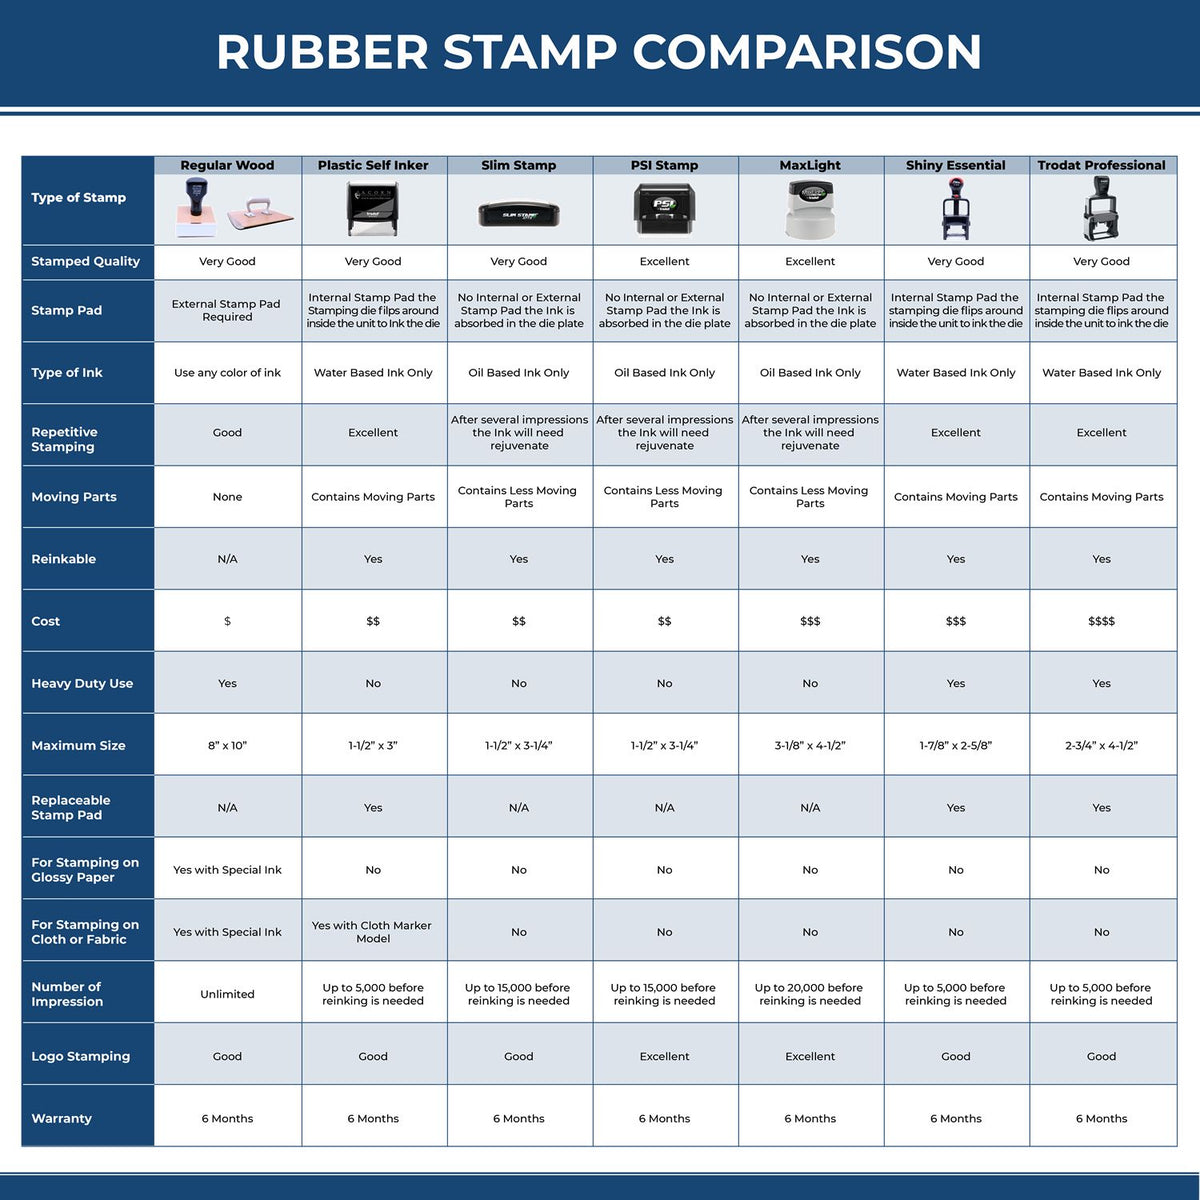 A comparison chart for the different types of mount models available for the Premium MaxLight Pre-Inked South Carolina Landscape Architectural Stamp.